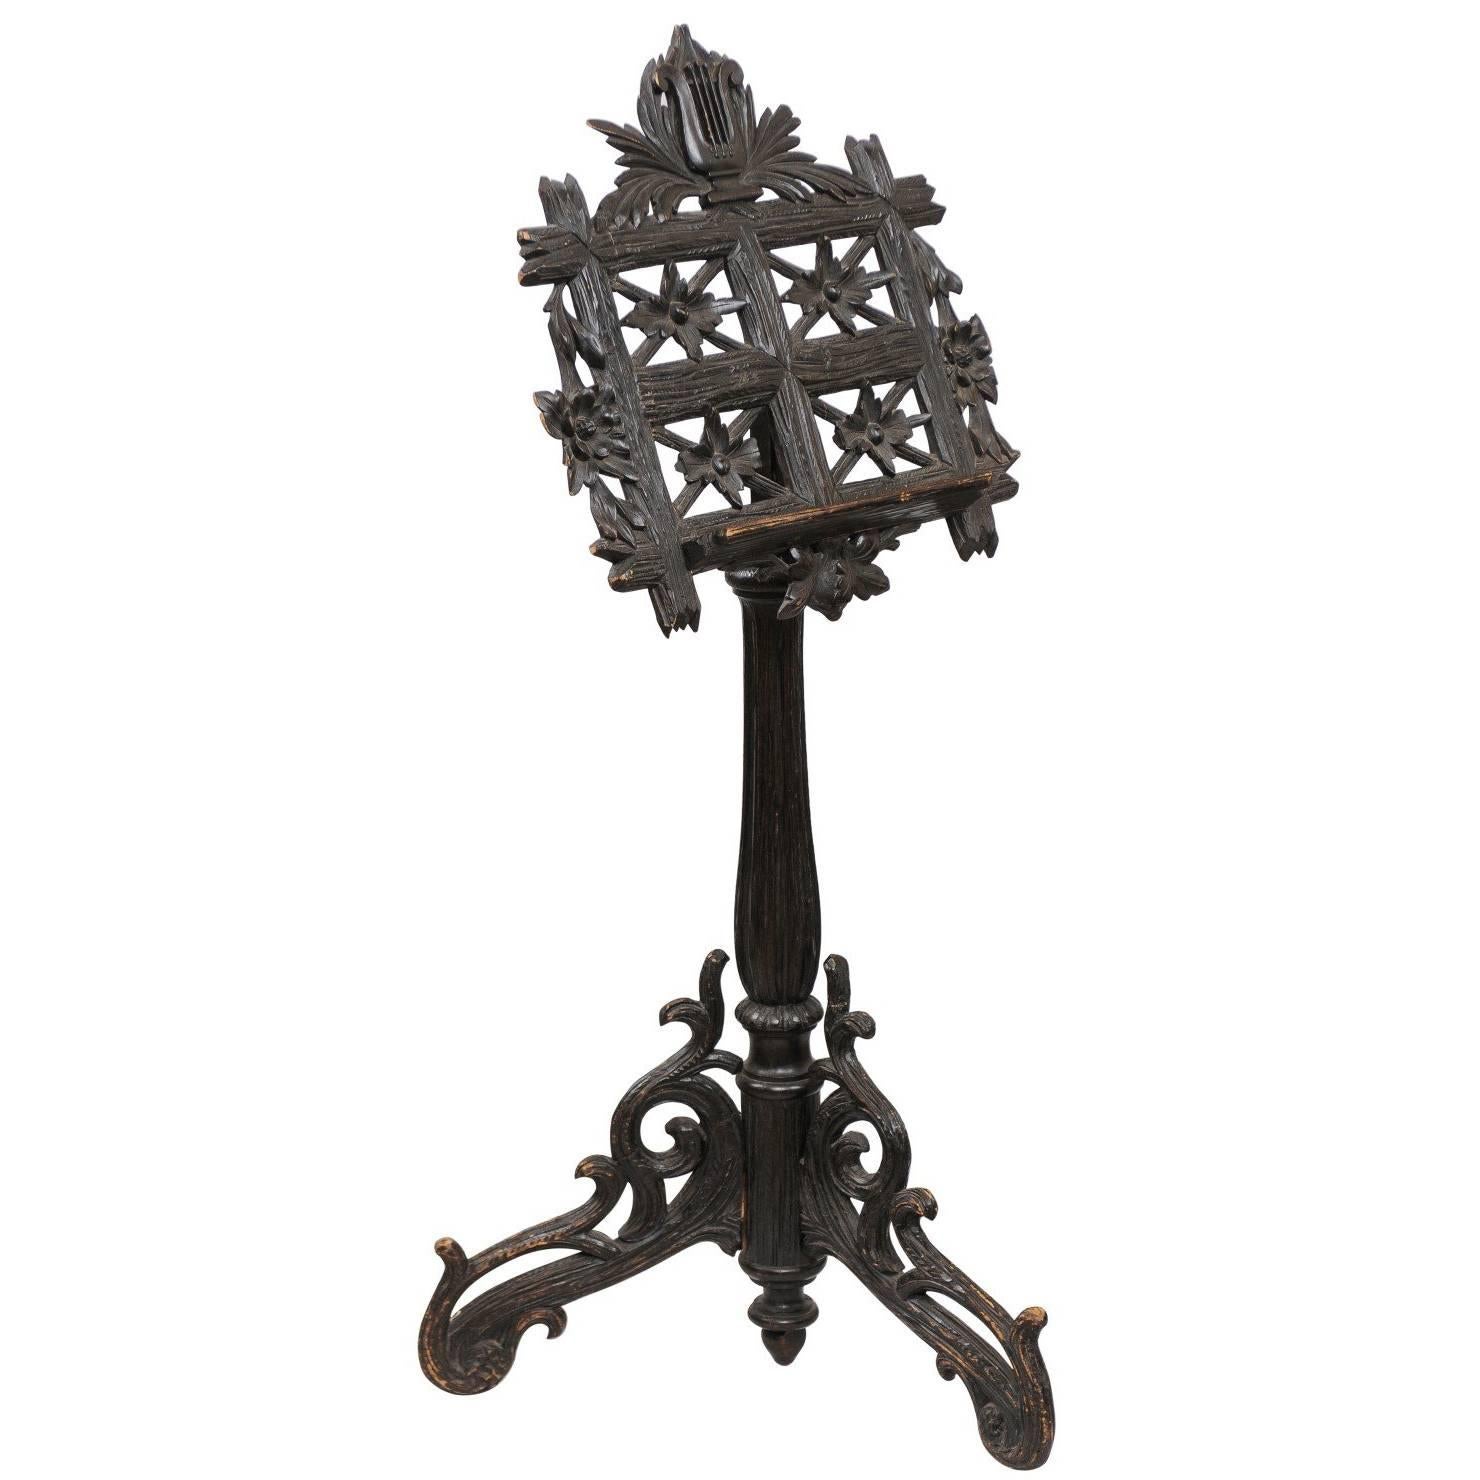 19th Century French Black Forest Music Stand with Carved Lyre Crest and Flowers